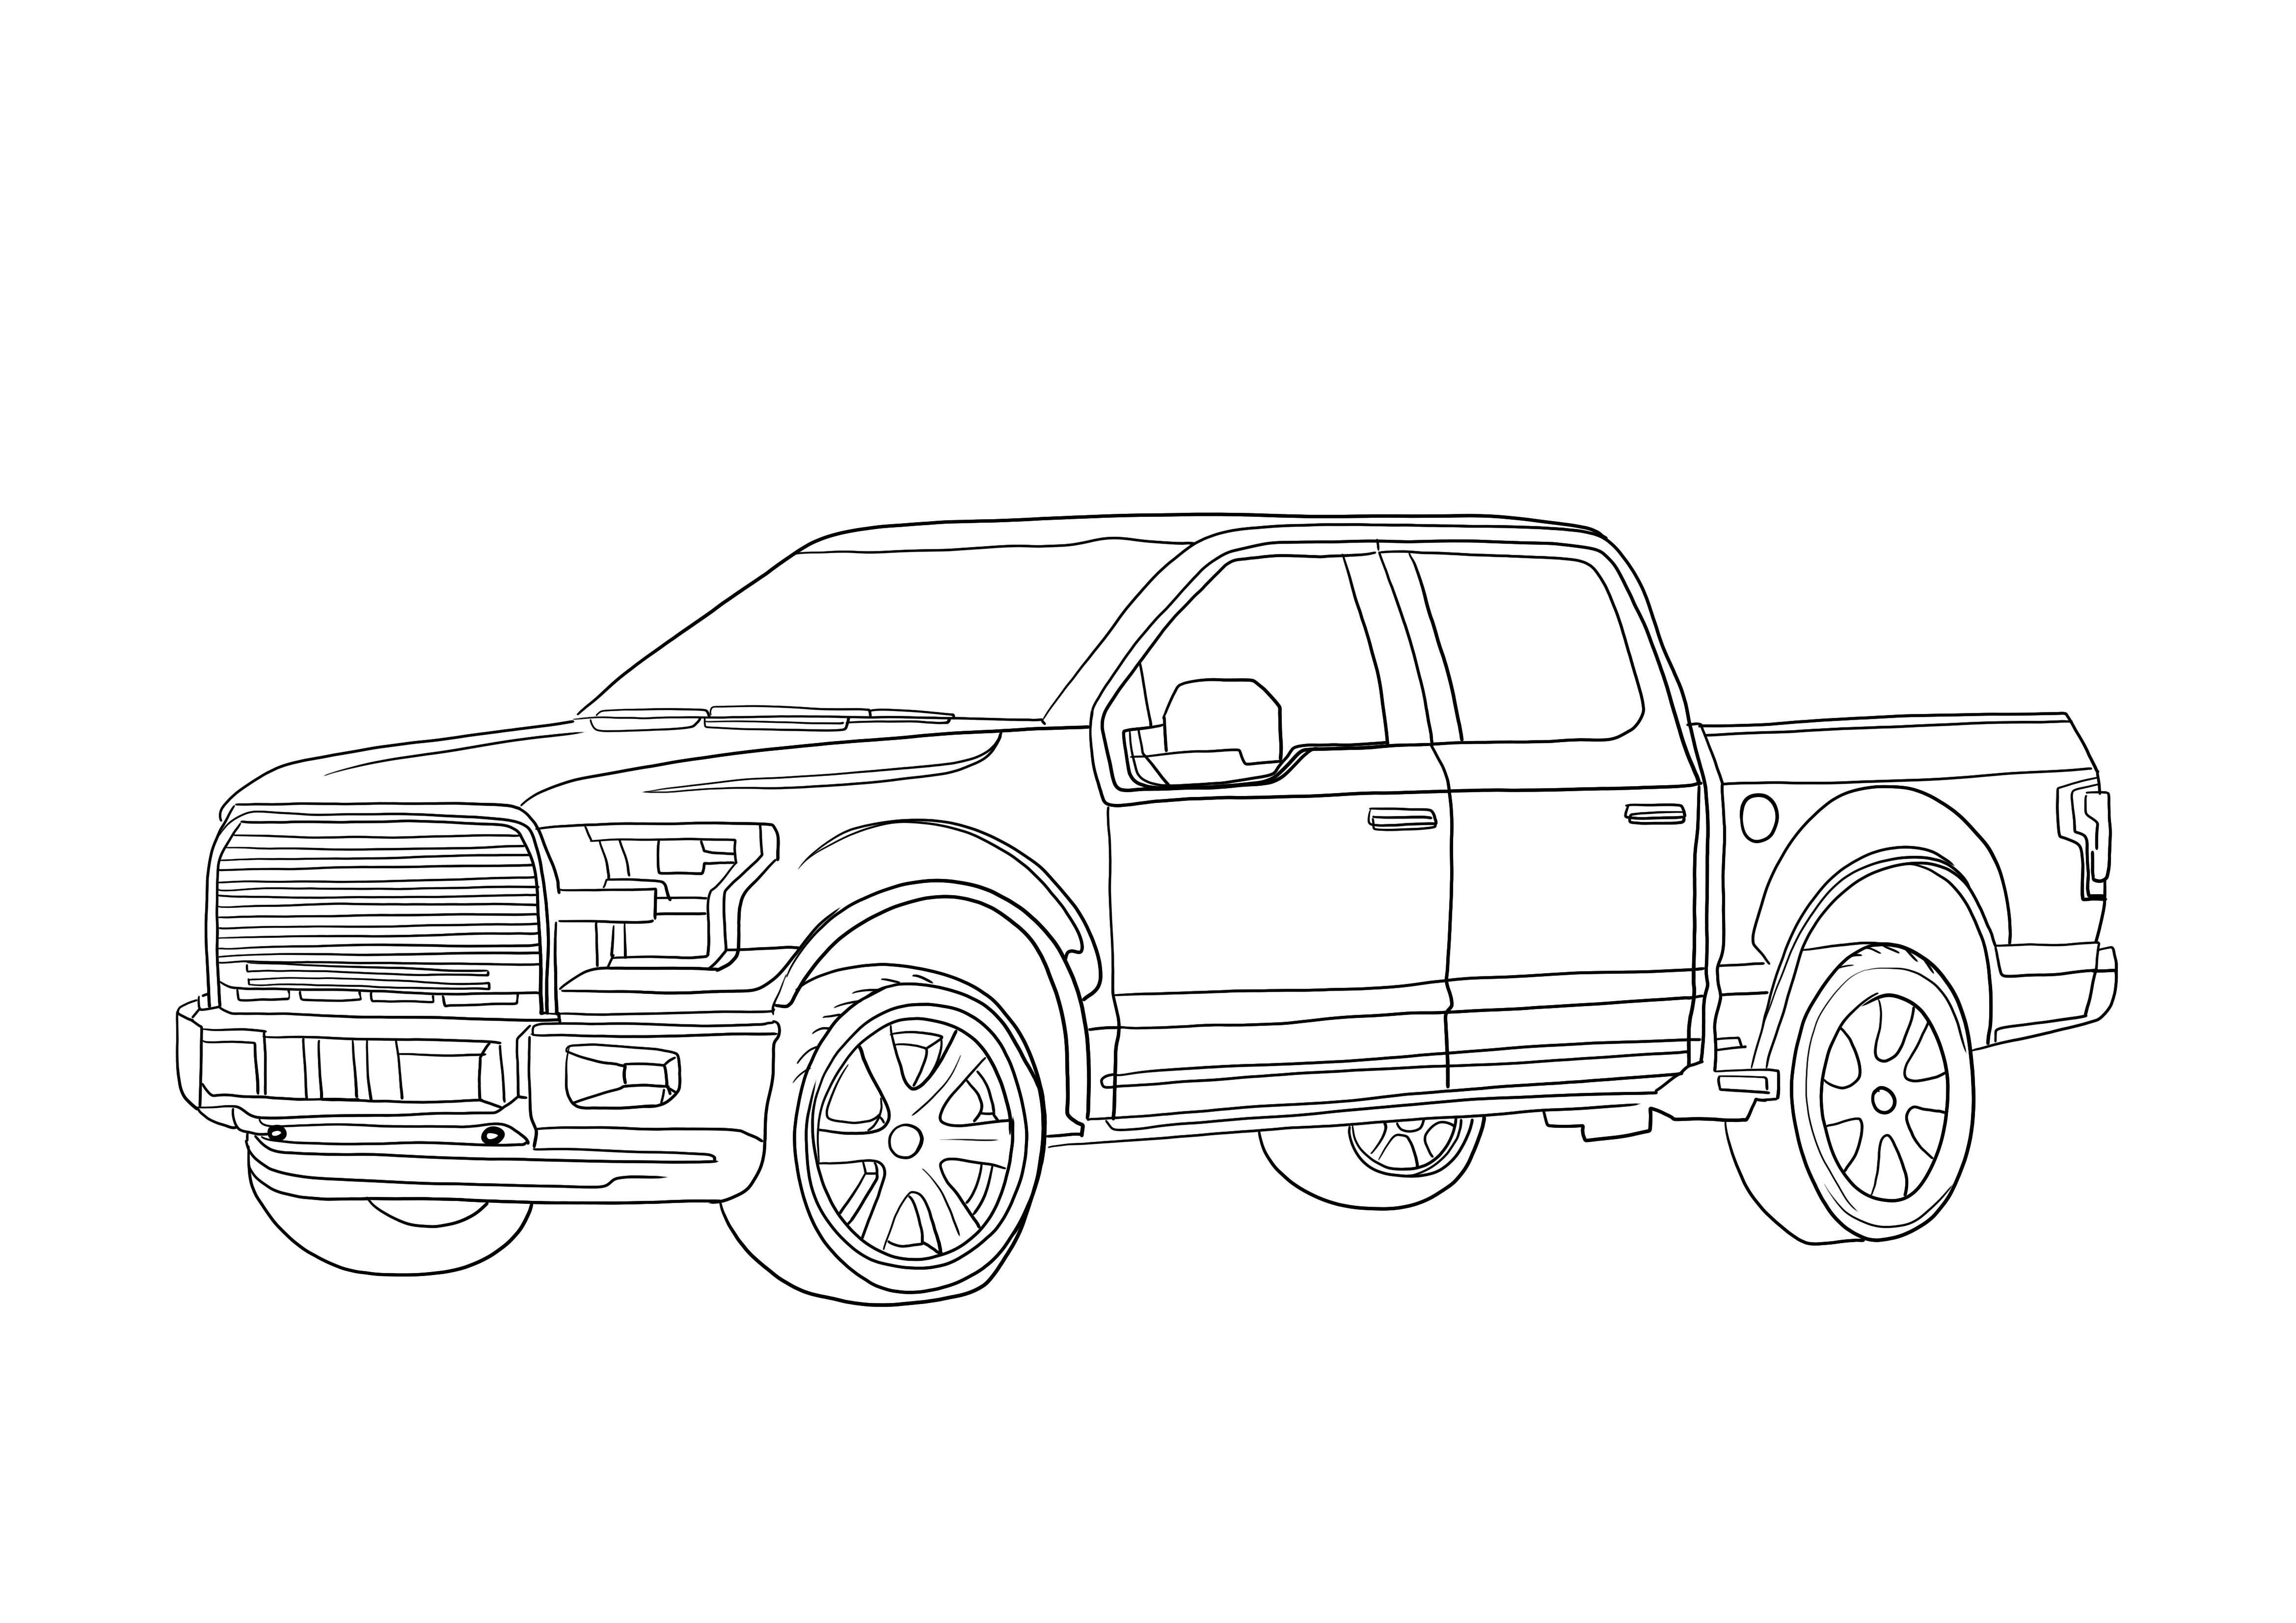 Ford F150 Pickup Truck free coloring page for kids